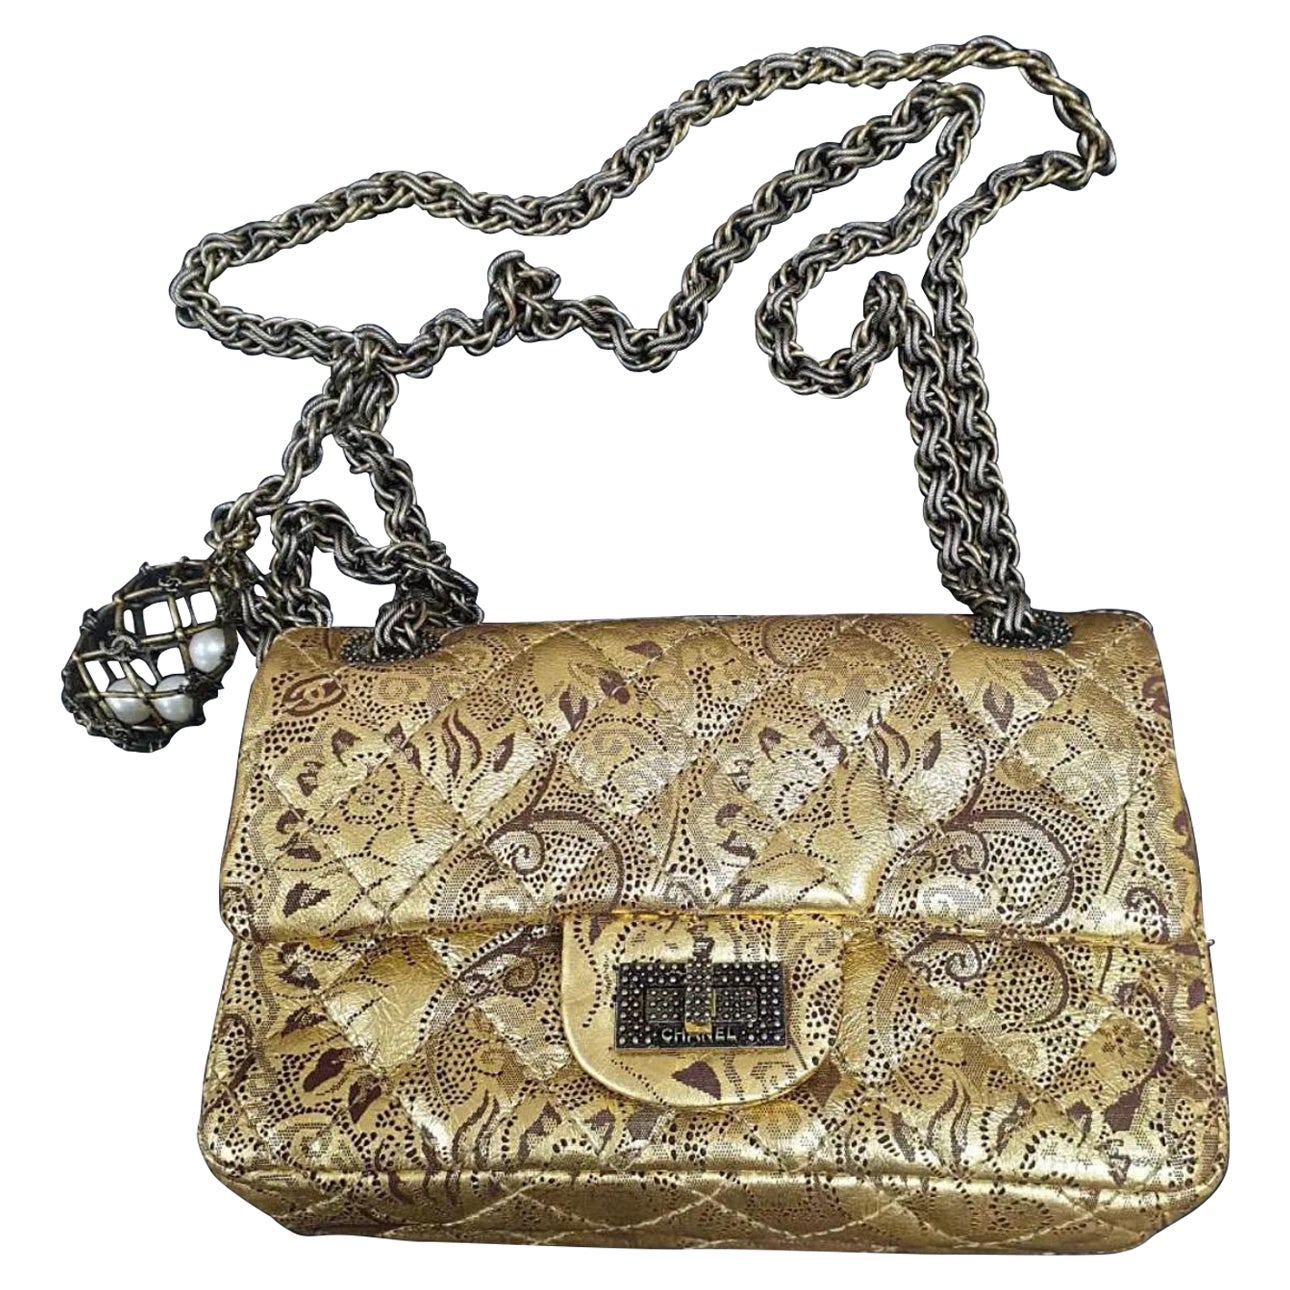 Now Sold - Buy Preloved Authentic Designer Used & Second Hand Bags, Wallets  & Accessories. - Page 9